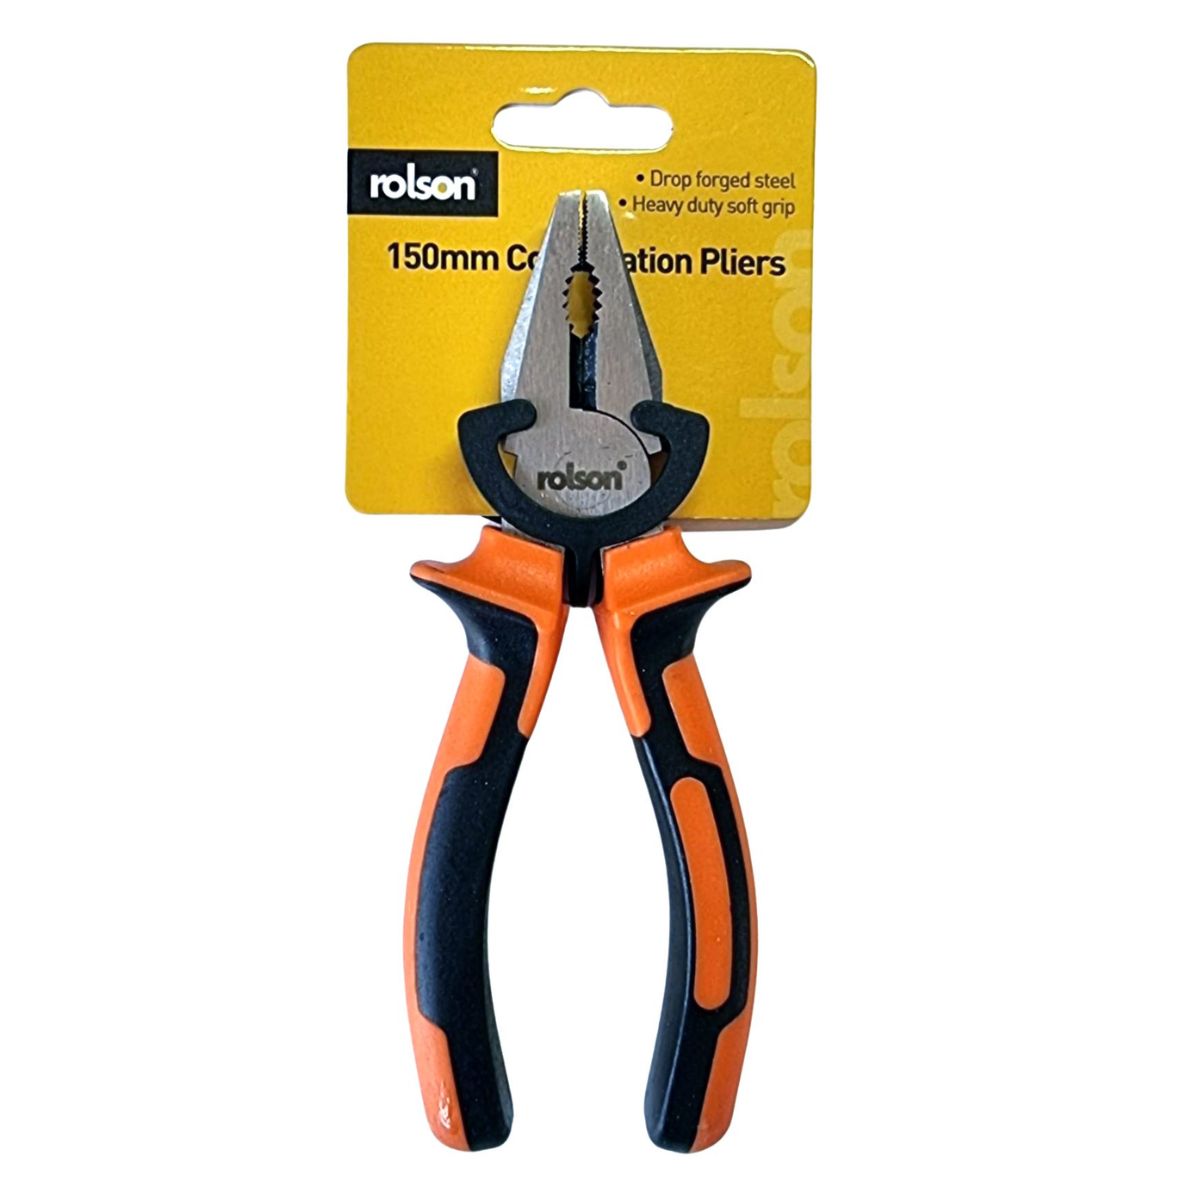 A new pair of Rolson 150mm combination pliers with orange and black handles, packaged on a retail card.